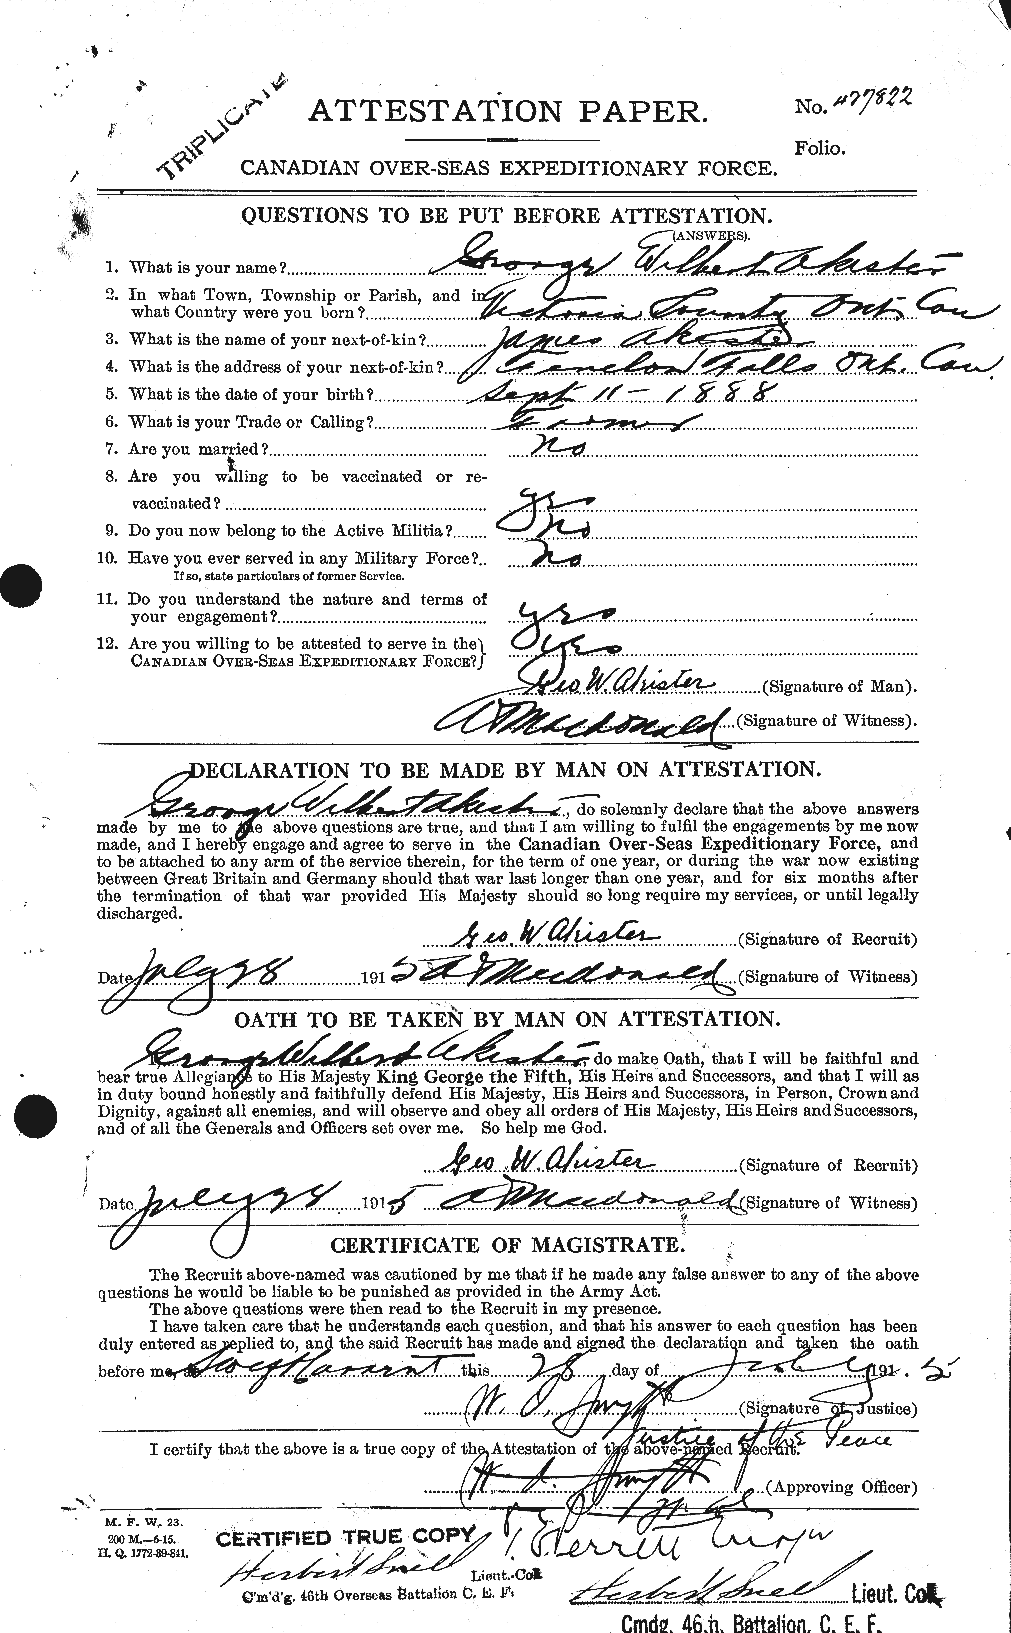 Personnel Records of the First World War - CEF 203585a